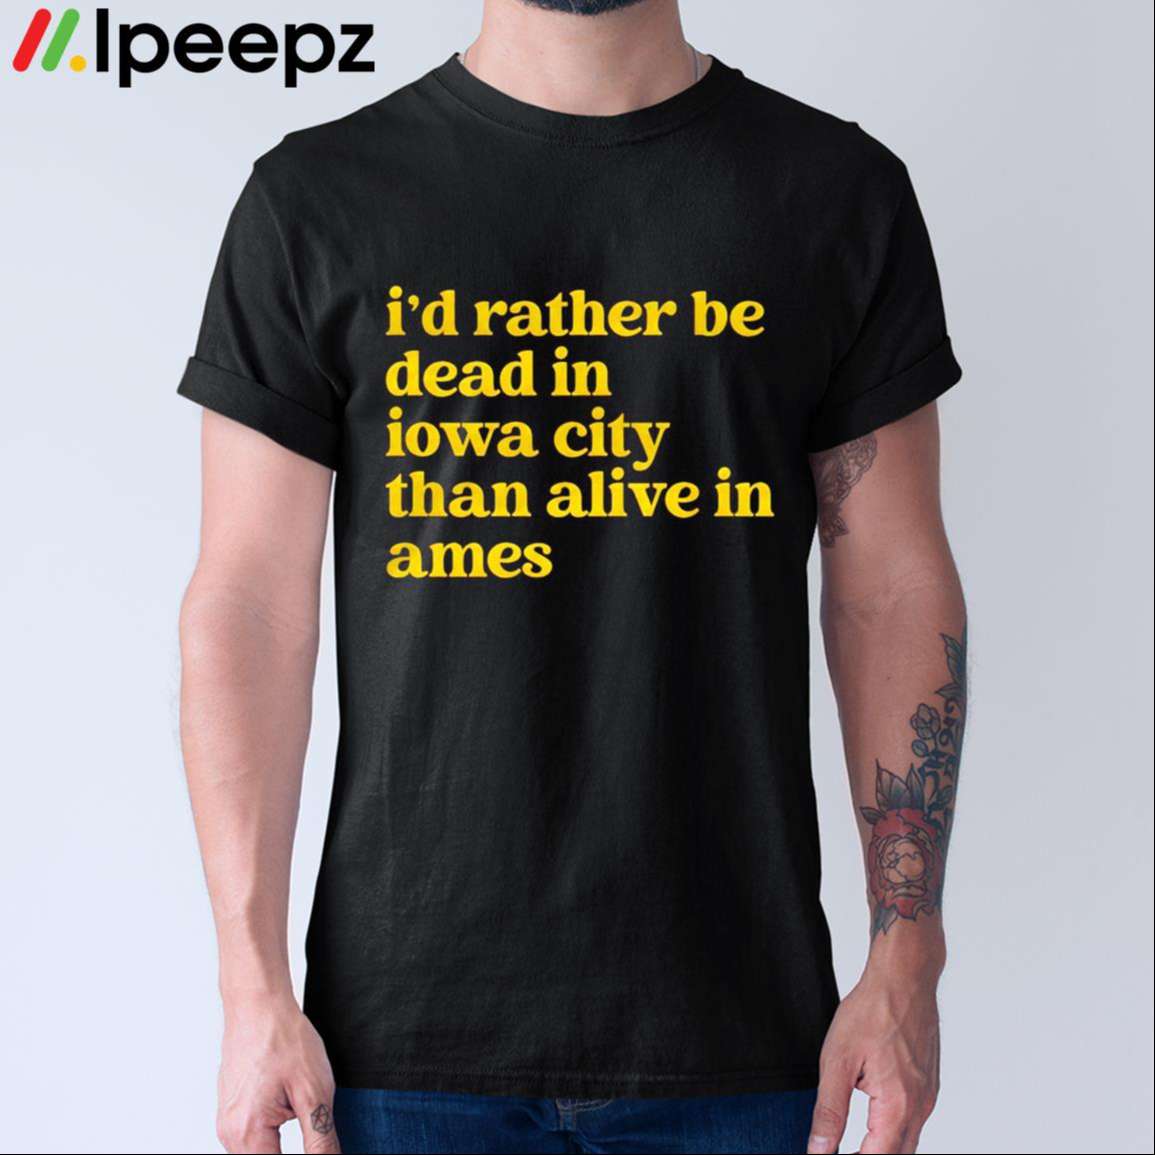 Id Rather Be Dead In Iowa City Than Alive In Ames Shirt